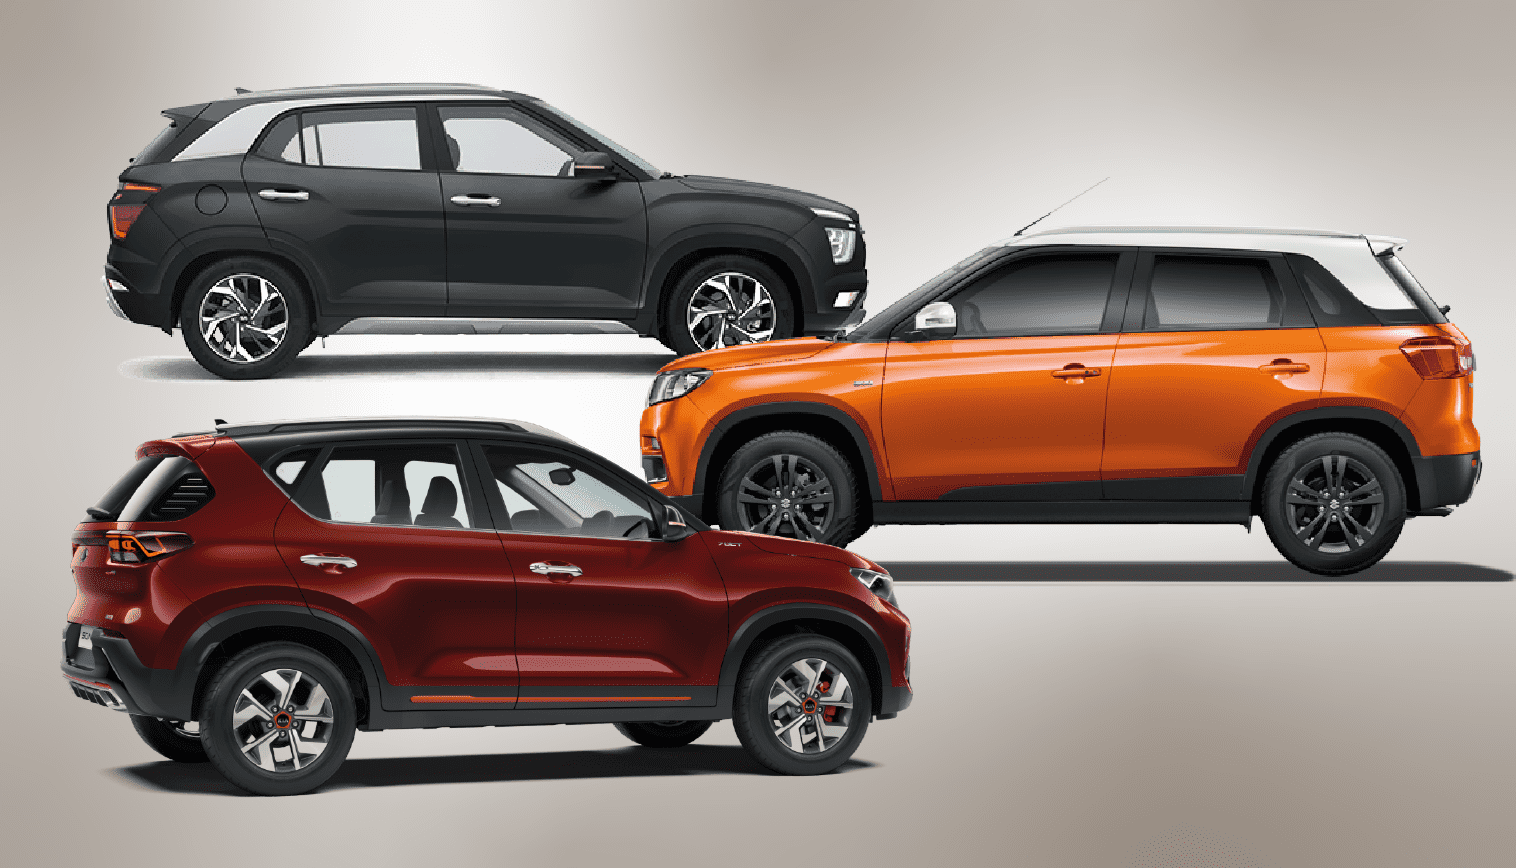 A list of the 9 best family SUV cars in India